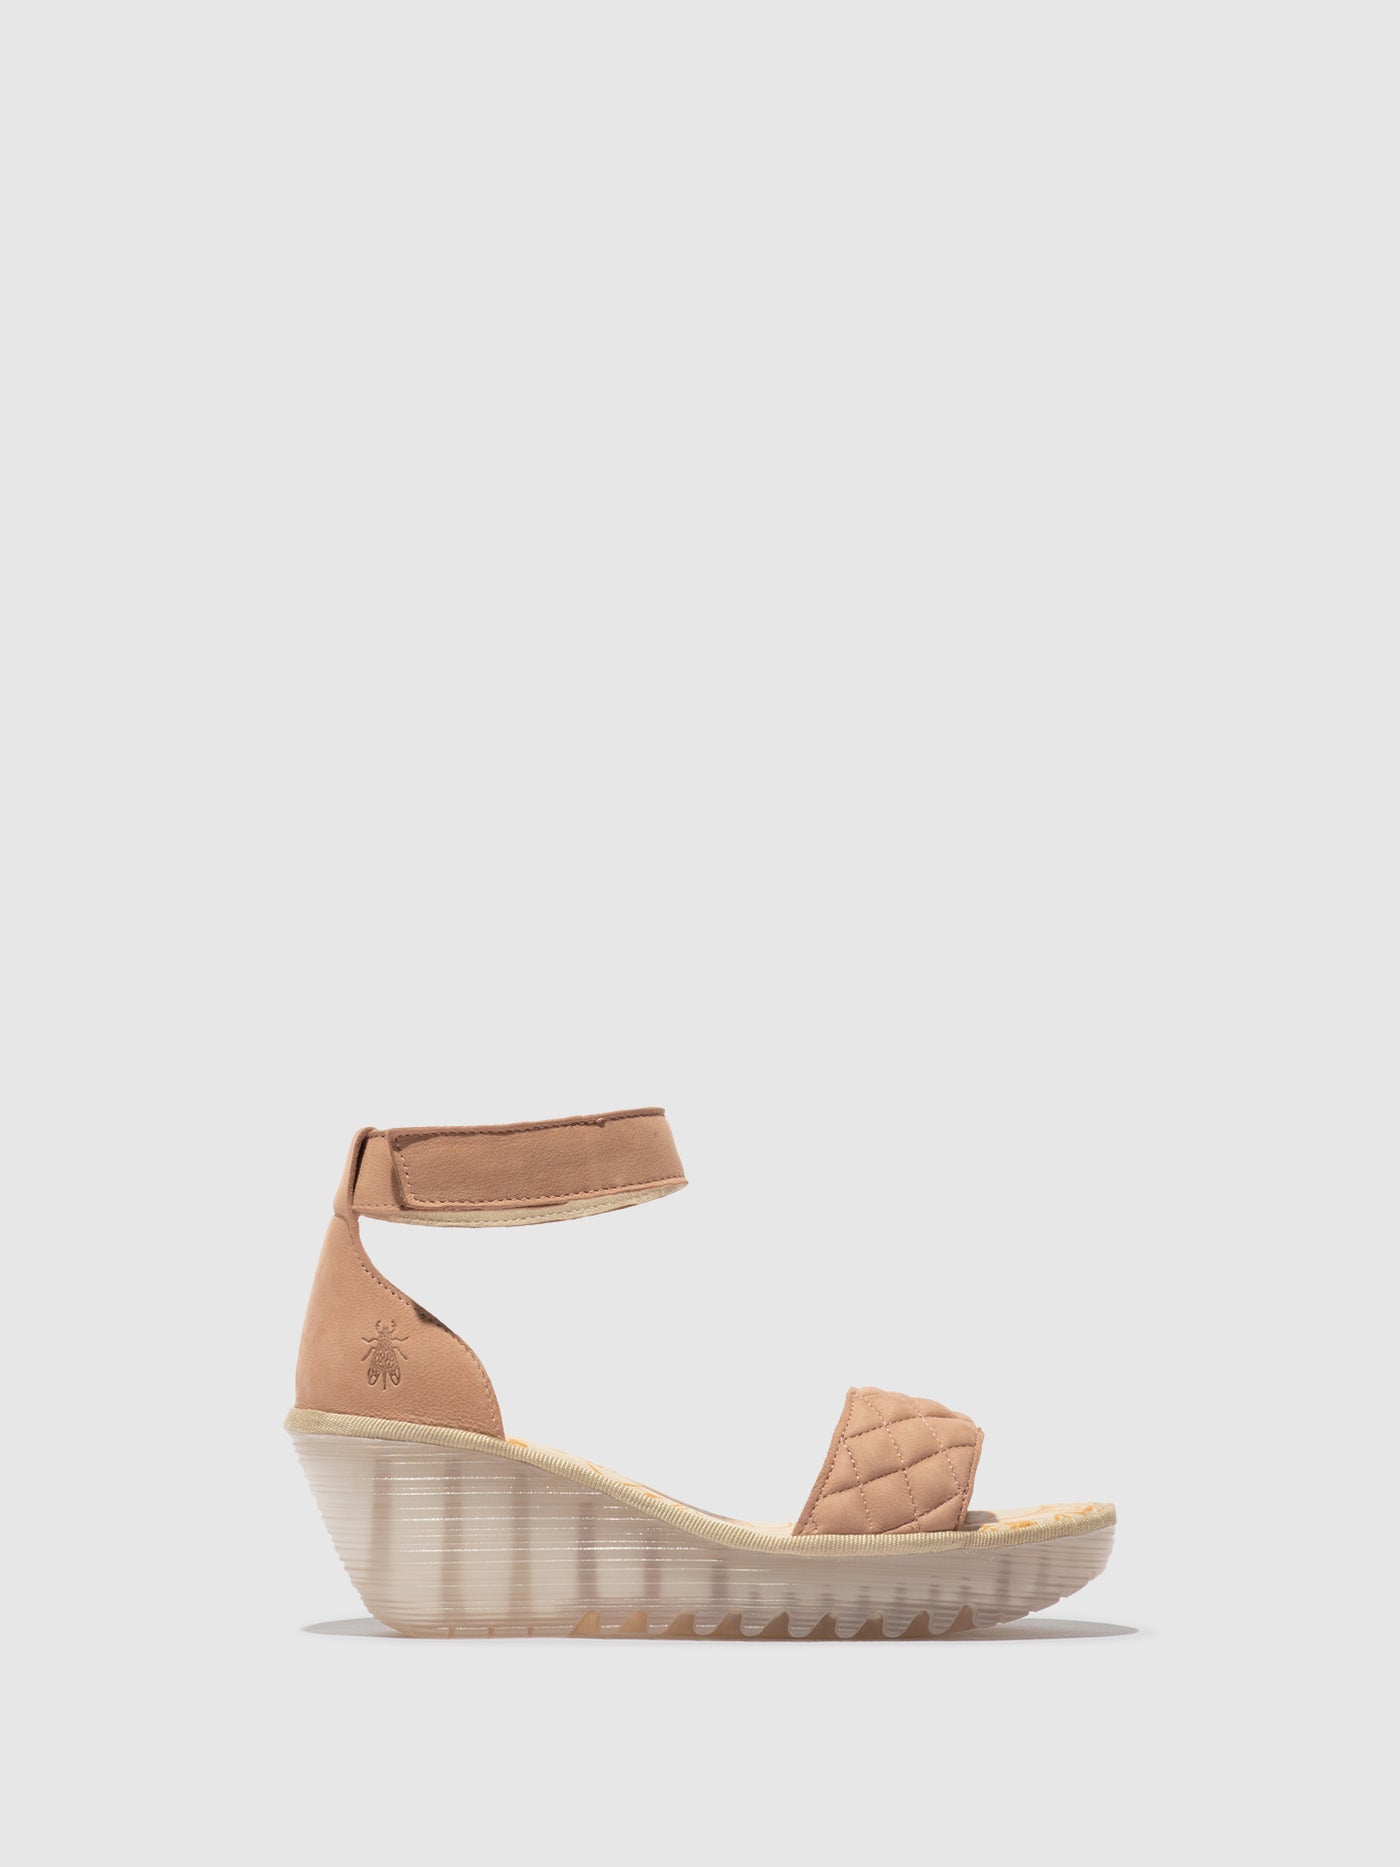 Ankle Strap Sandals YARU471FLY NUDE PINK/NUDE PINK